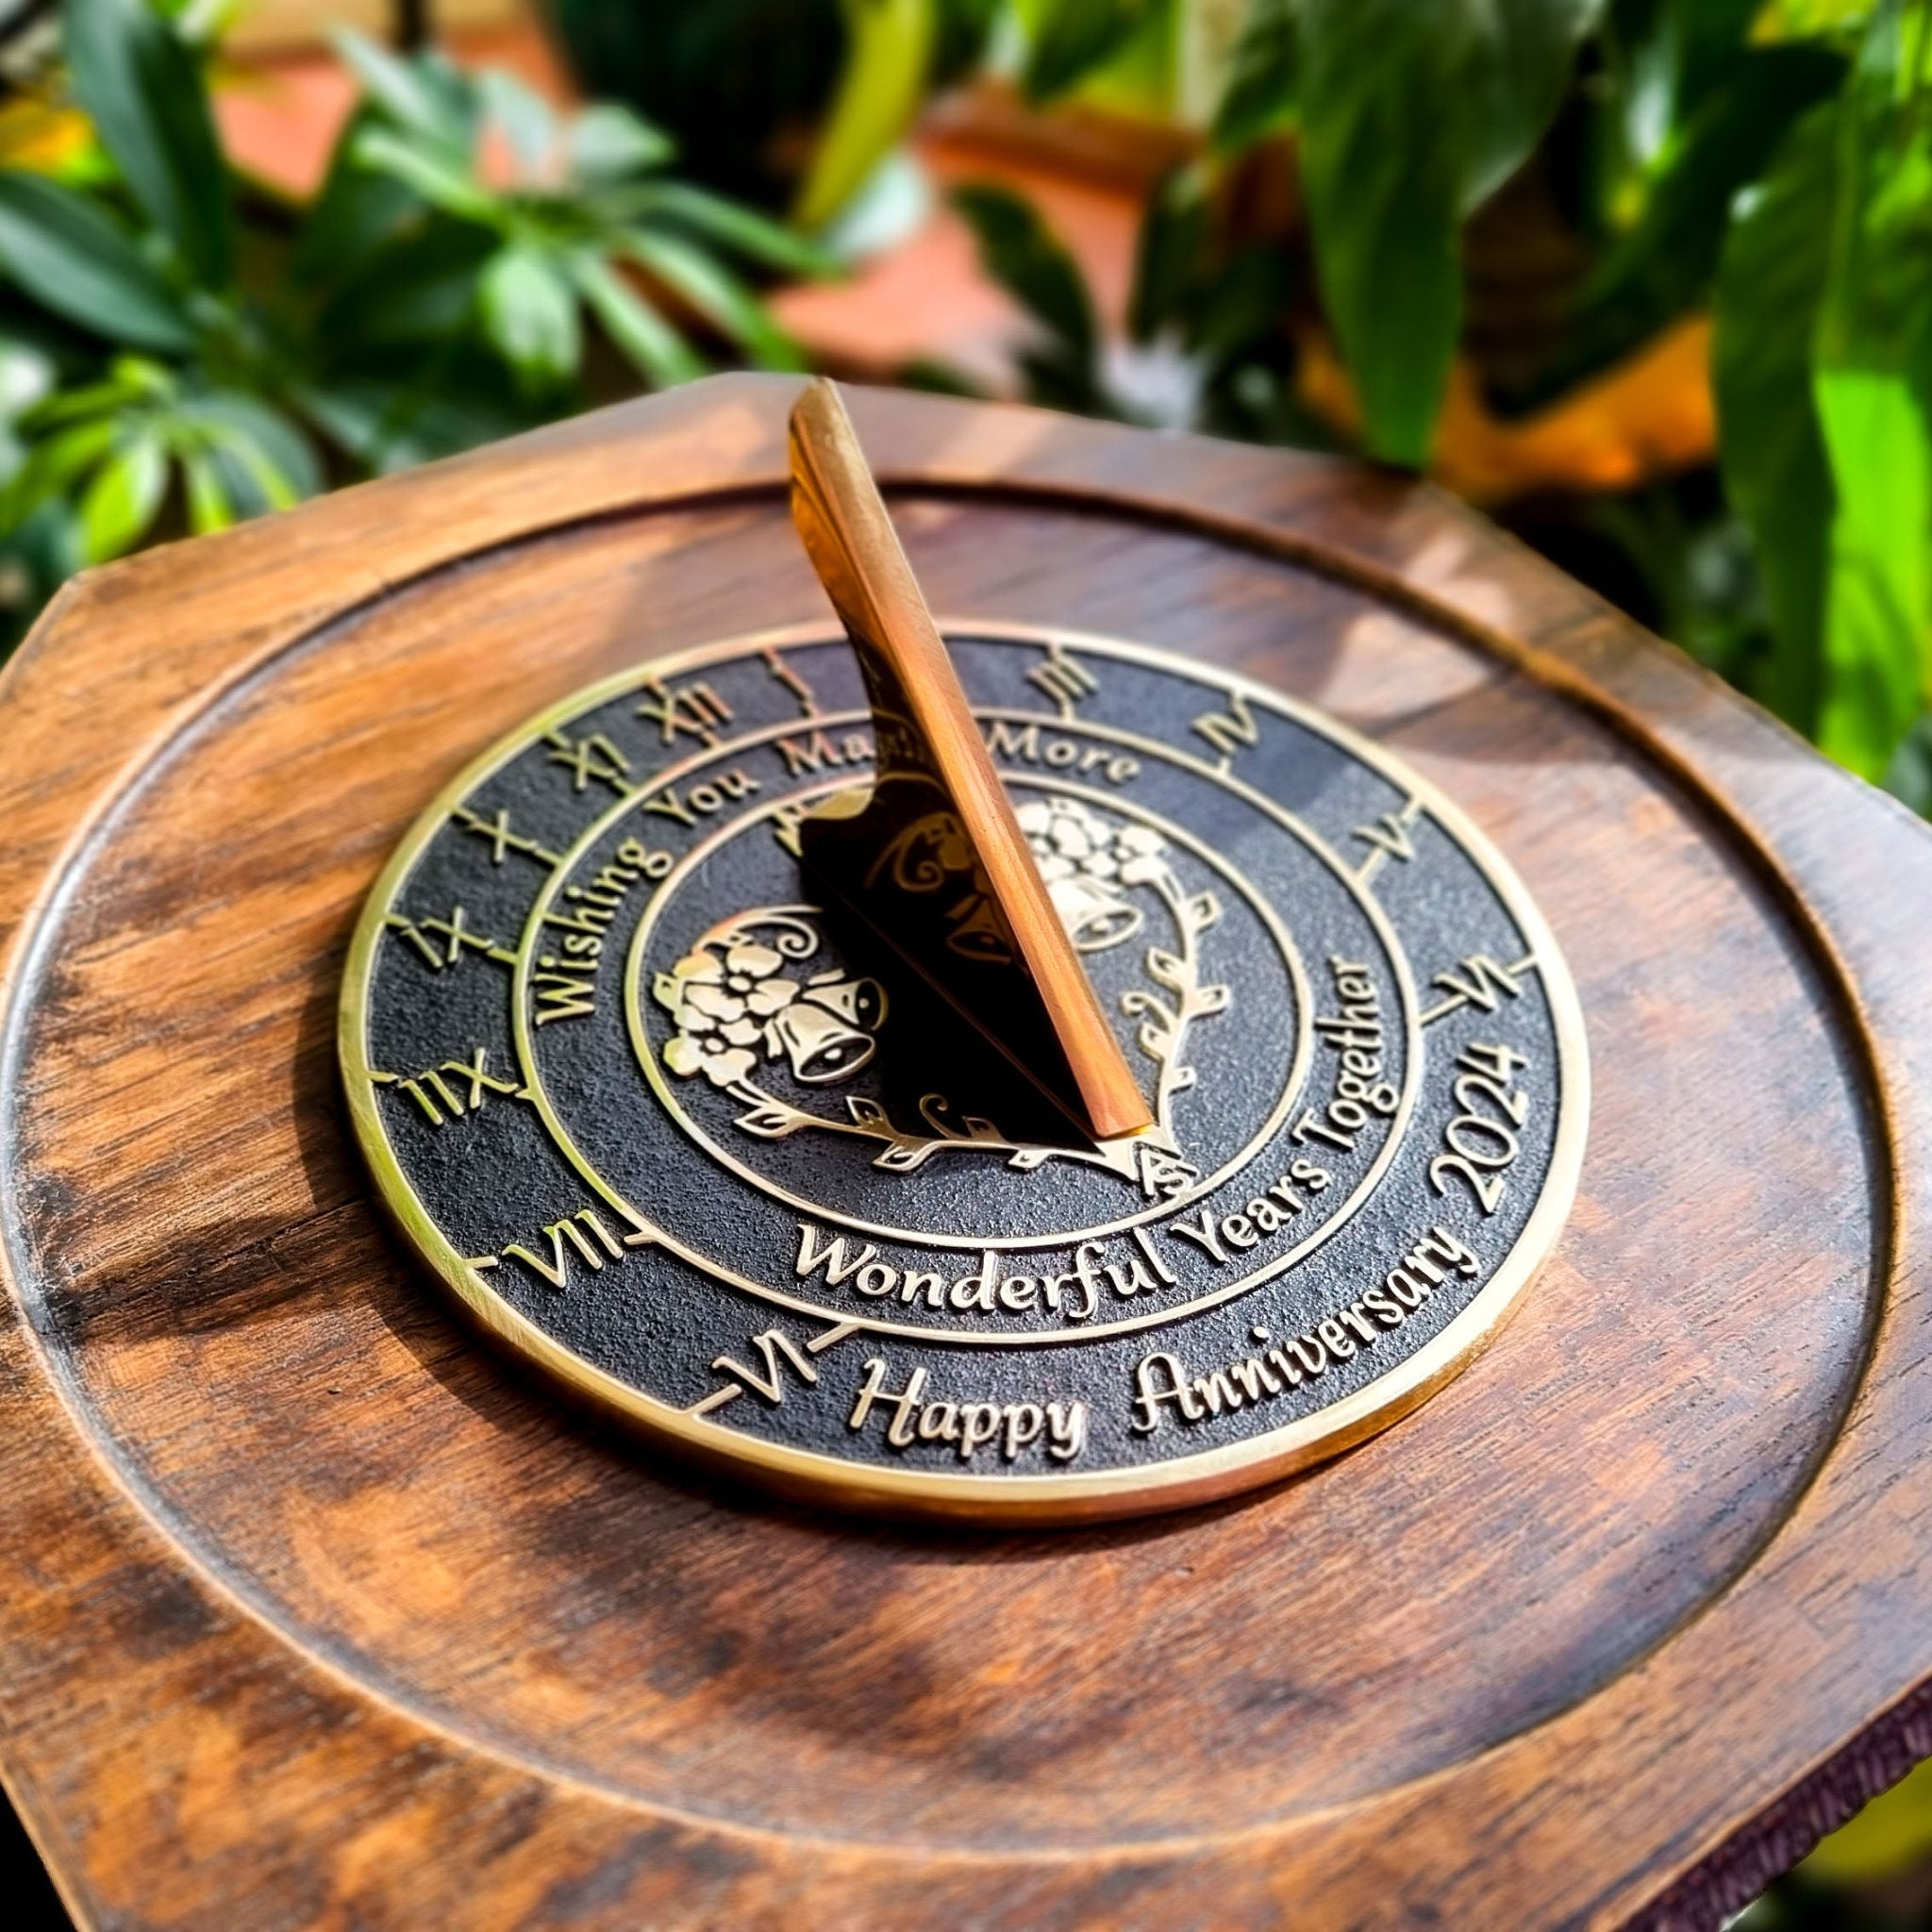 Anniversary Sundial Gift ‘Wonderful Years Together’ - The Metal Foundry